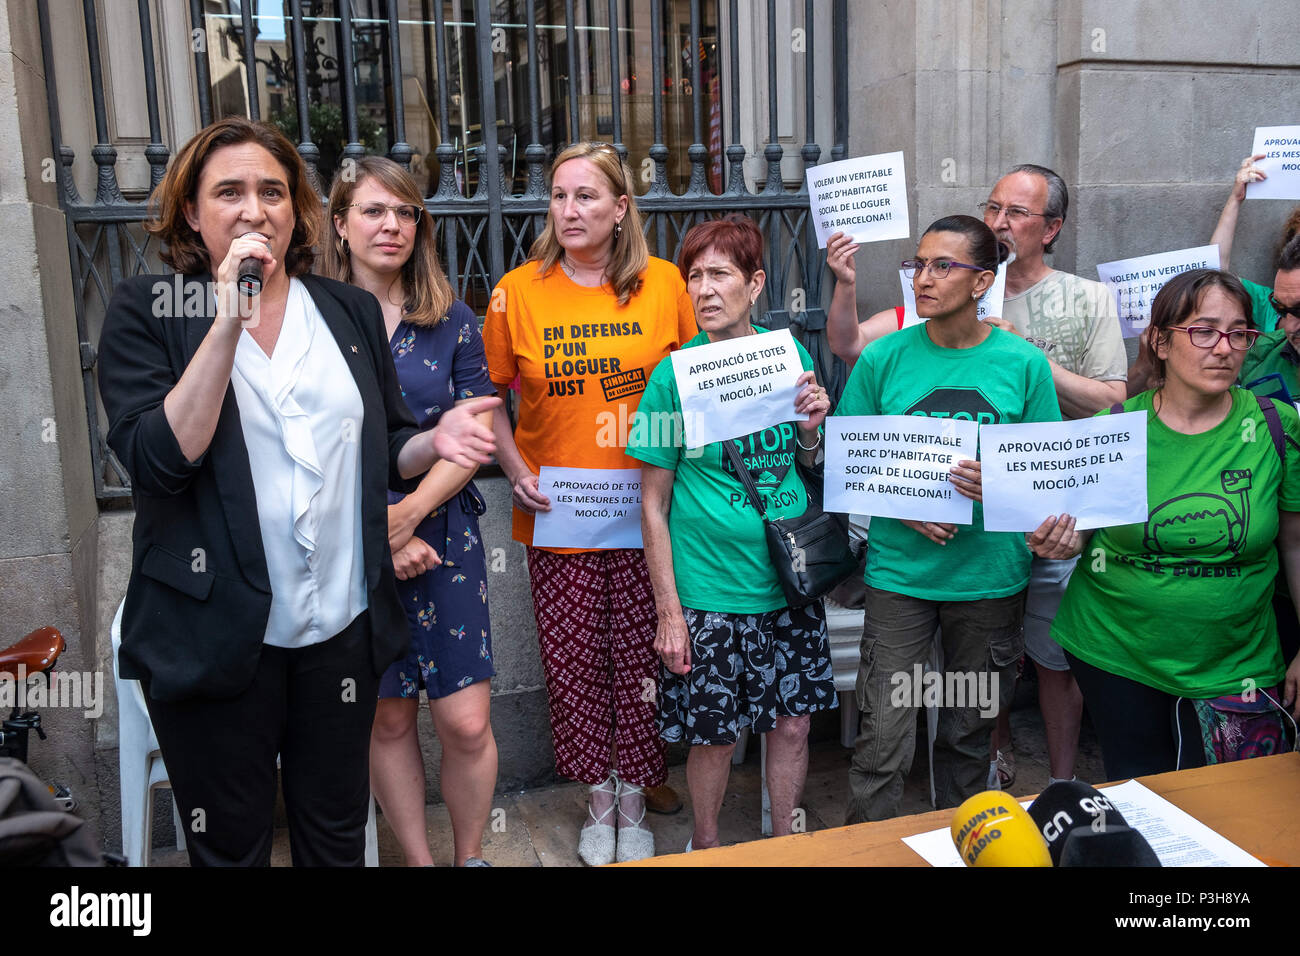 June 18, 2018 - Barcelona, Catalonia, Spain - The mayor Ada Colau and the director of the area of urbanism, Janet Sanz, are seen accompanying the social entities during the signing of the agreement. Thanks to the impulse of the groups that defend the right to housing, the proposal to force the real estate developers to allocate 30% of the promotion to social rent housing is going forward. The mayor Ada Colau and various entities for public housing have staged outside Barcelona City Council the signing of the agreement that now must go through different institutional procedures to be finally ap Stock Photo